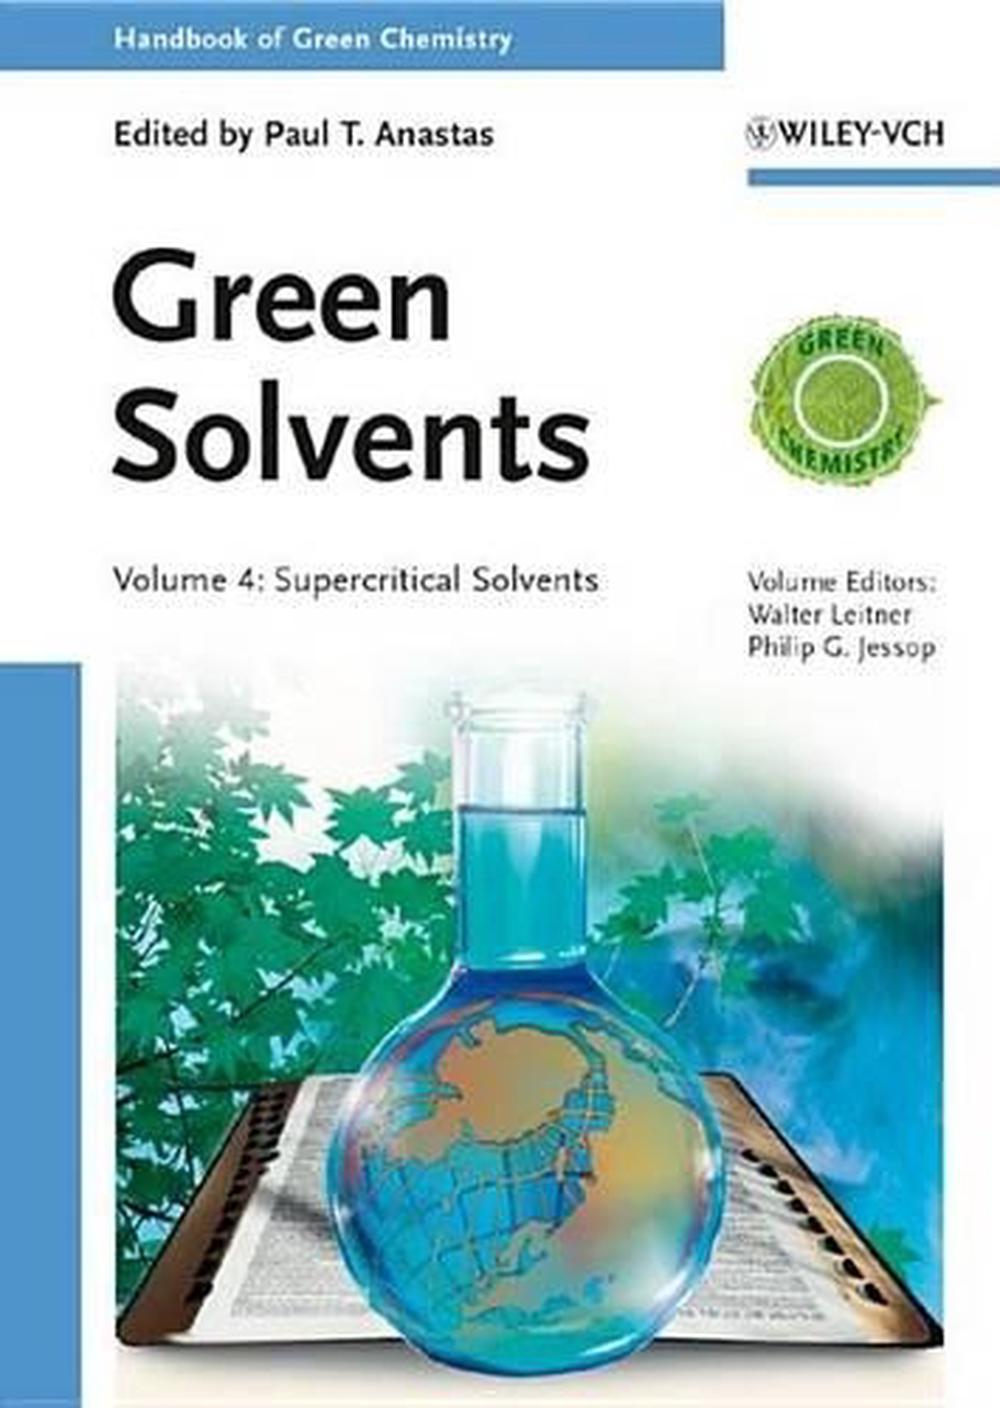 green chemistry research papers pdf